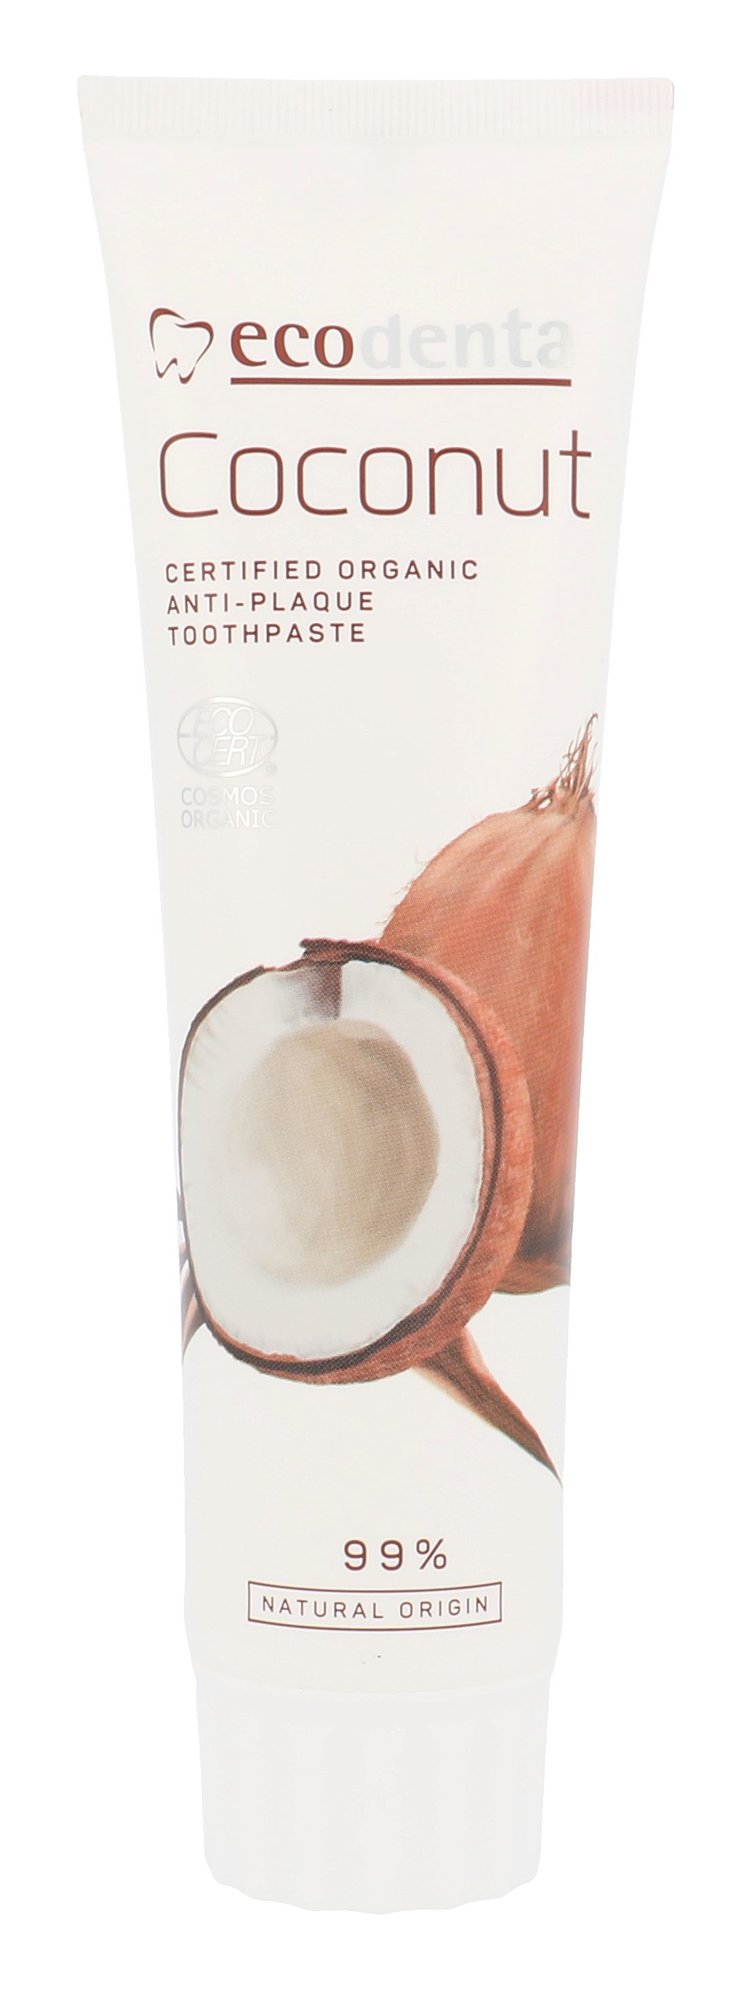 Ecodenta Certified Organic Anti-Plaque Toothpaste